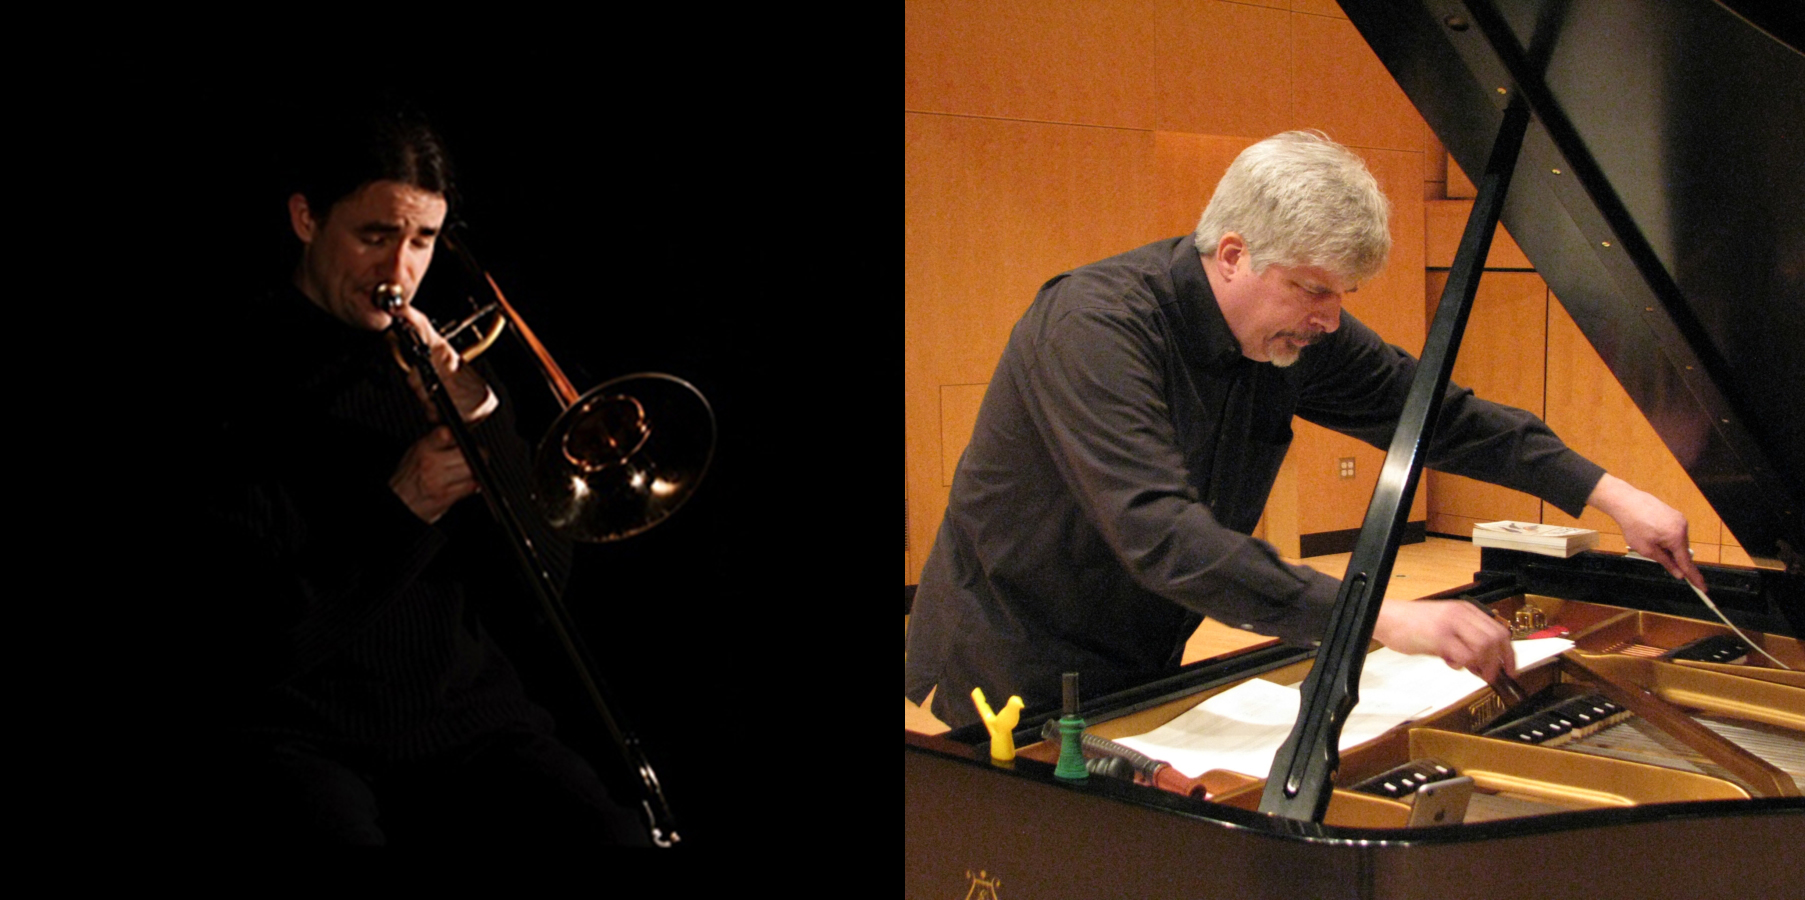 On the left, a man shrouded in darkness plays a trombone. On the right, a man with grey hair is reaching into the interior of a piano.